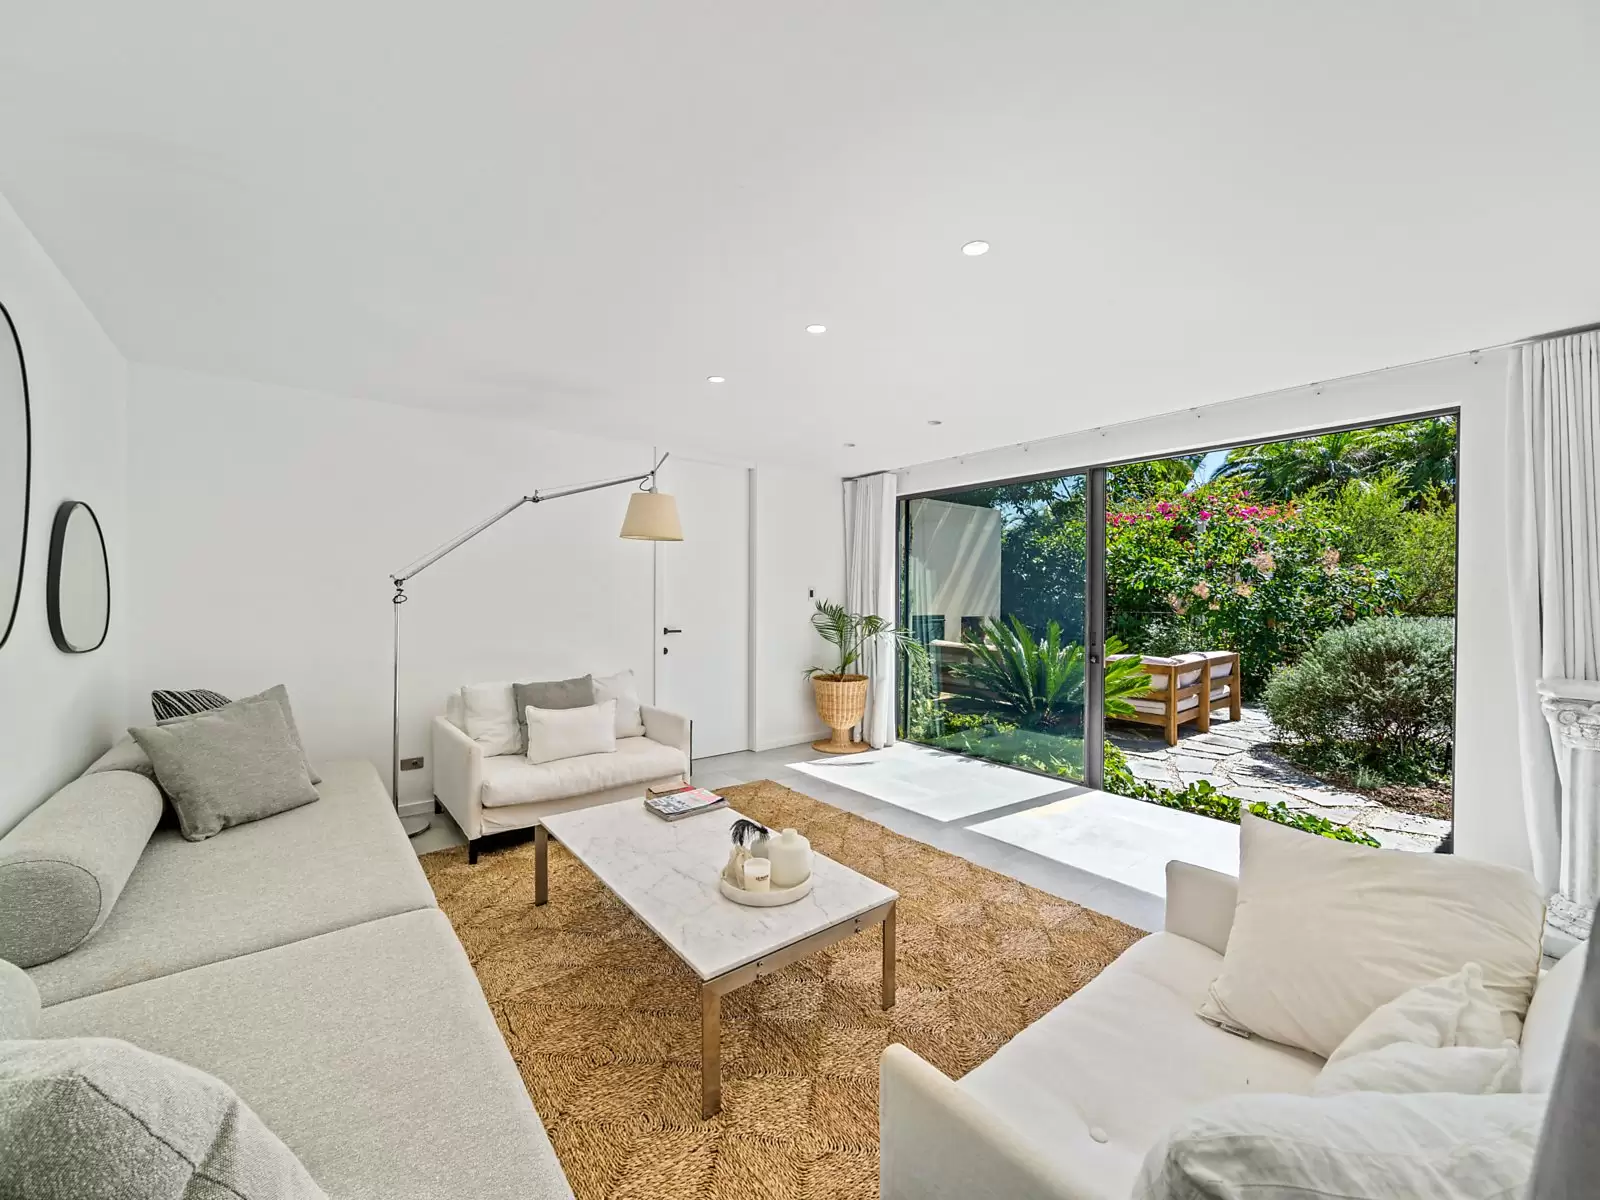 Photo #18: 27 Kent Road, Rose Bay - For Sale by Sydney Sotheby's International Realty